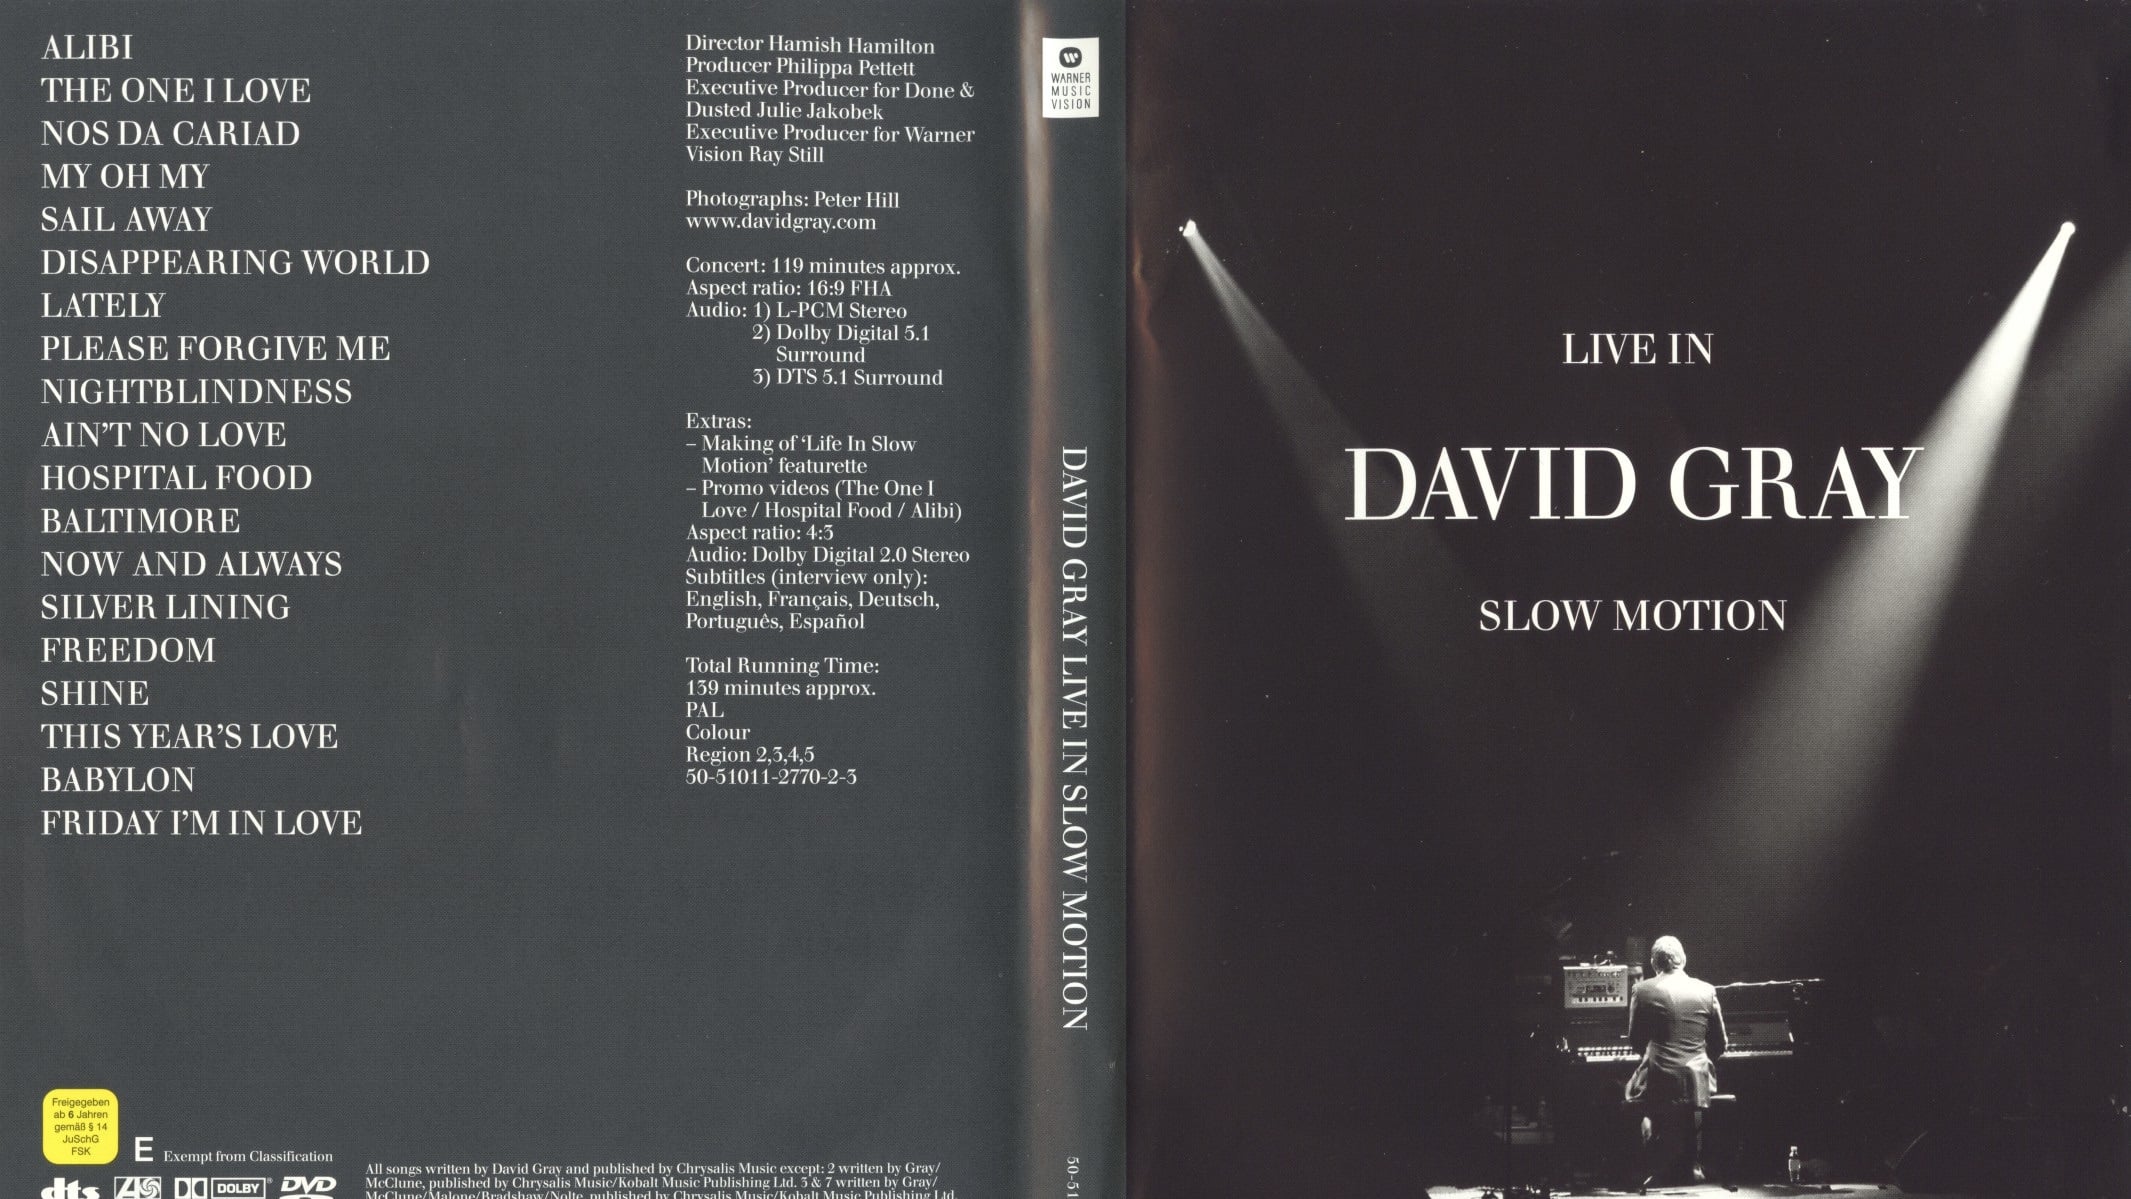 David Gray: LIVE in Slow Motion (2006)